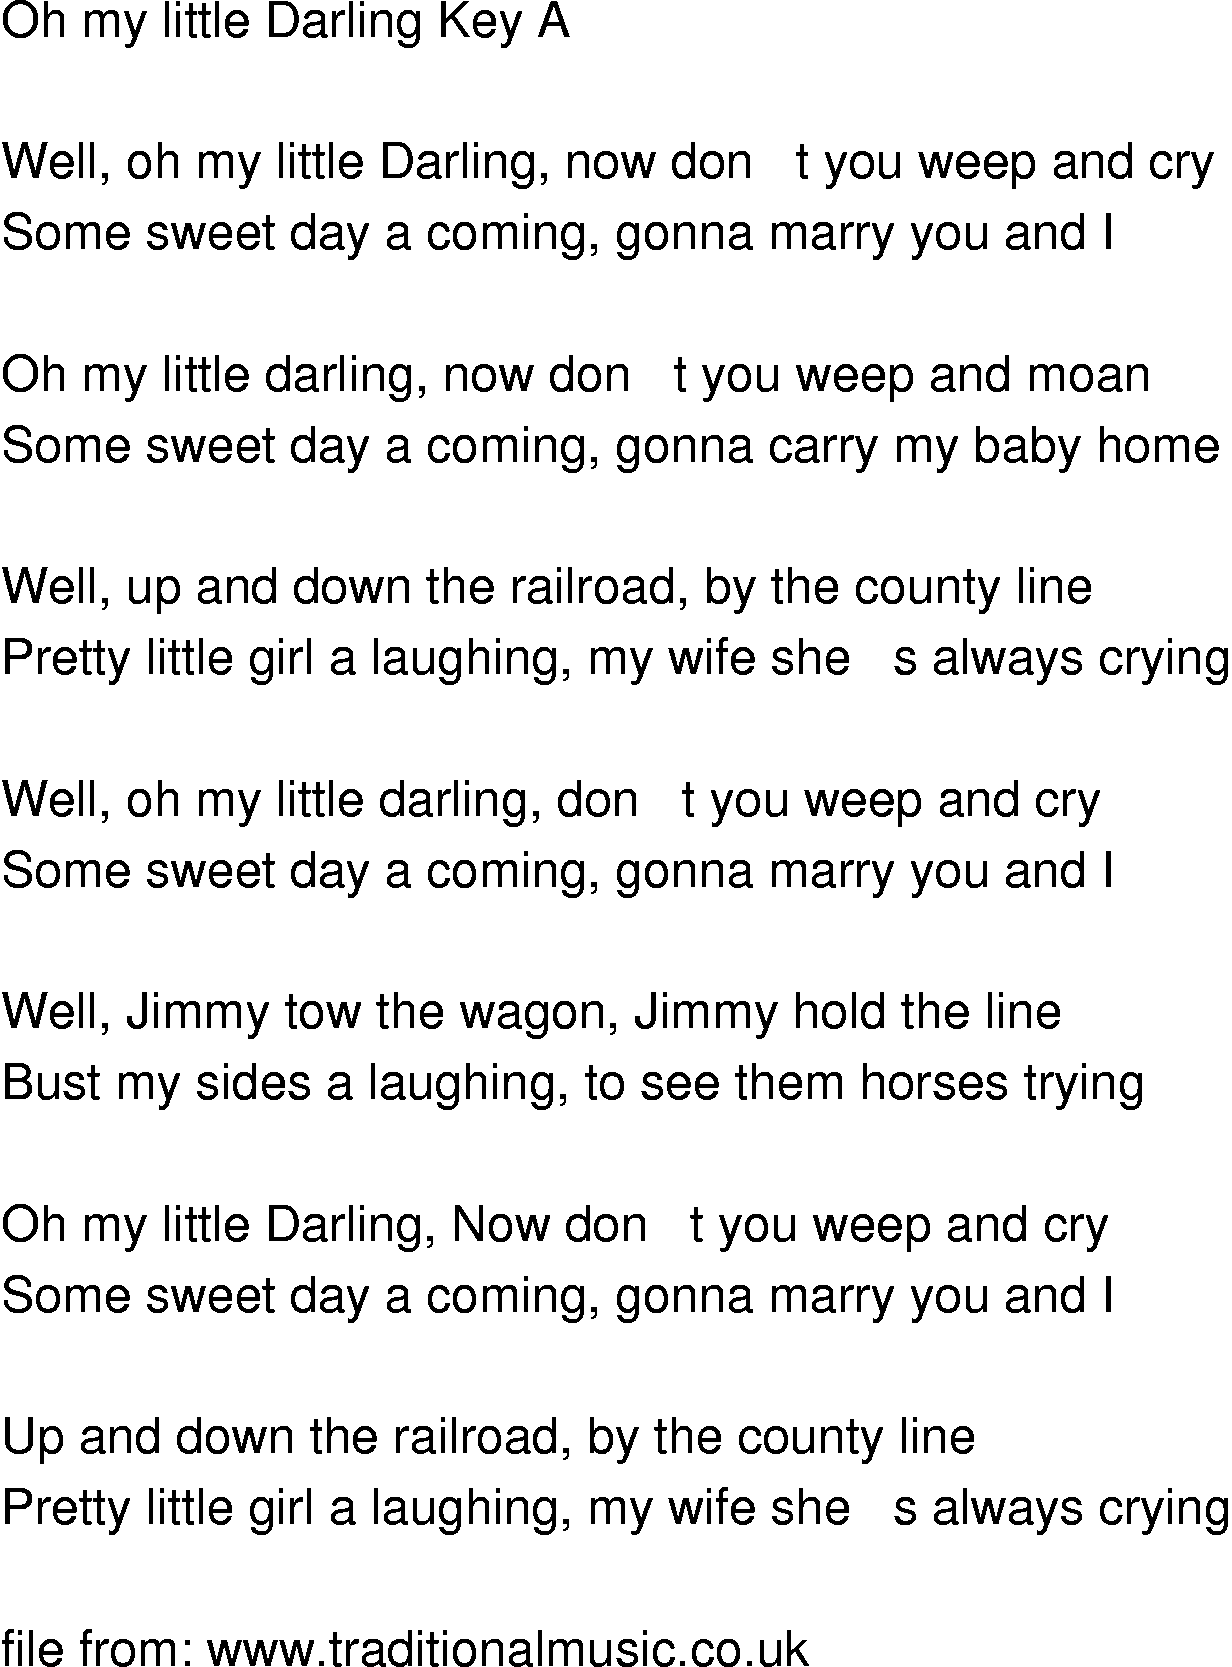 Old-Time (oldtimey) Song Lyrics - oh my little darling